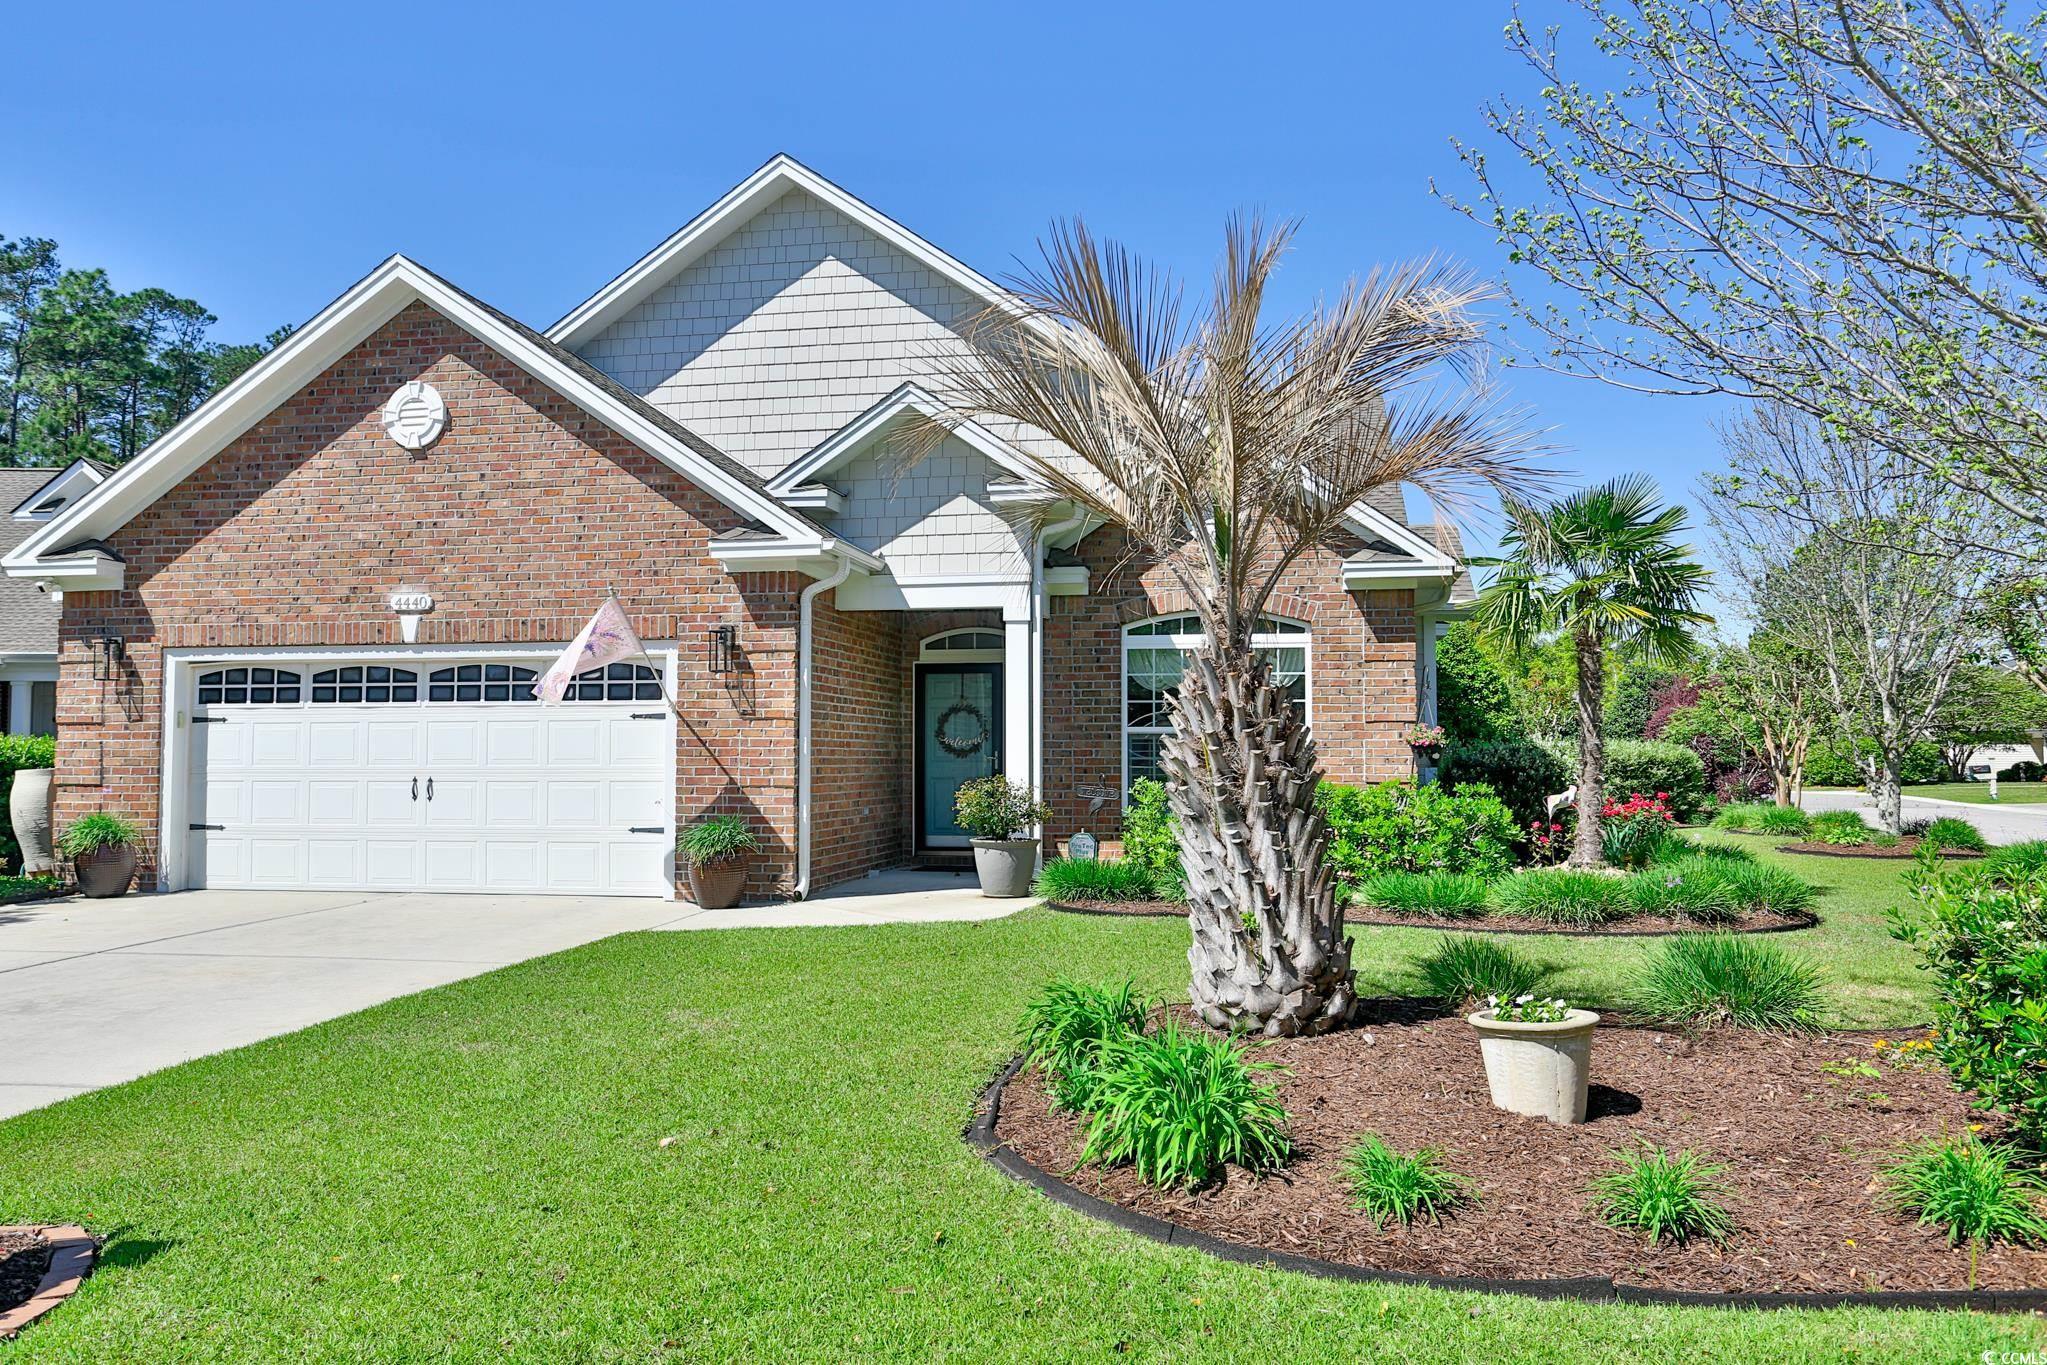 Photo one of 4440 Firethorne Dr. Murrells Inlet SC 29576 | MLS 2409022